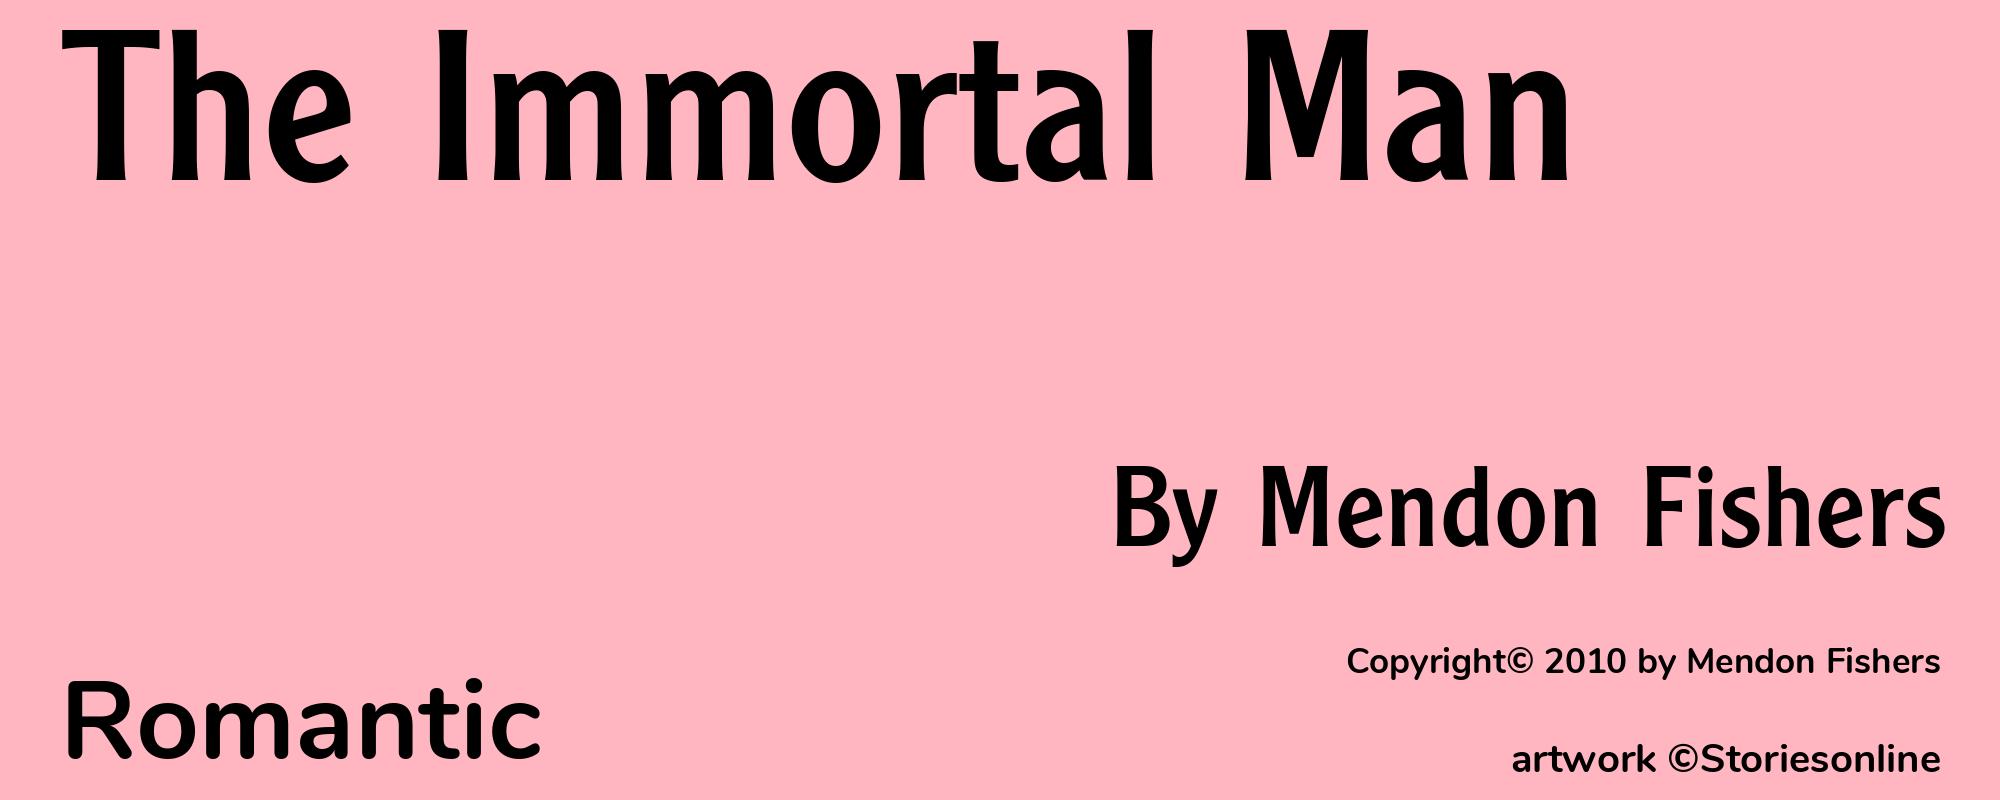 The Immortal Man - Cover